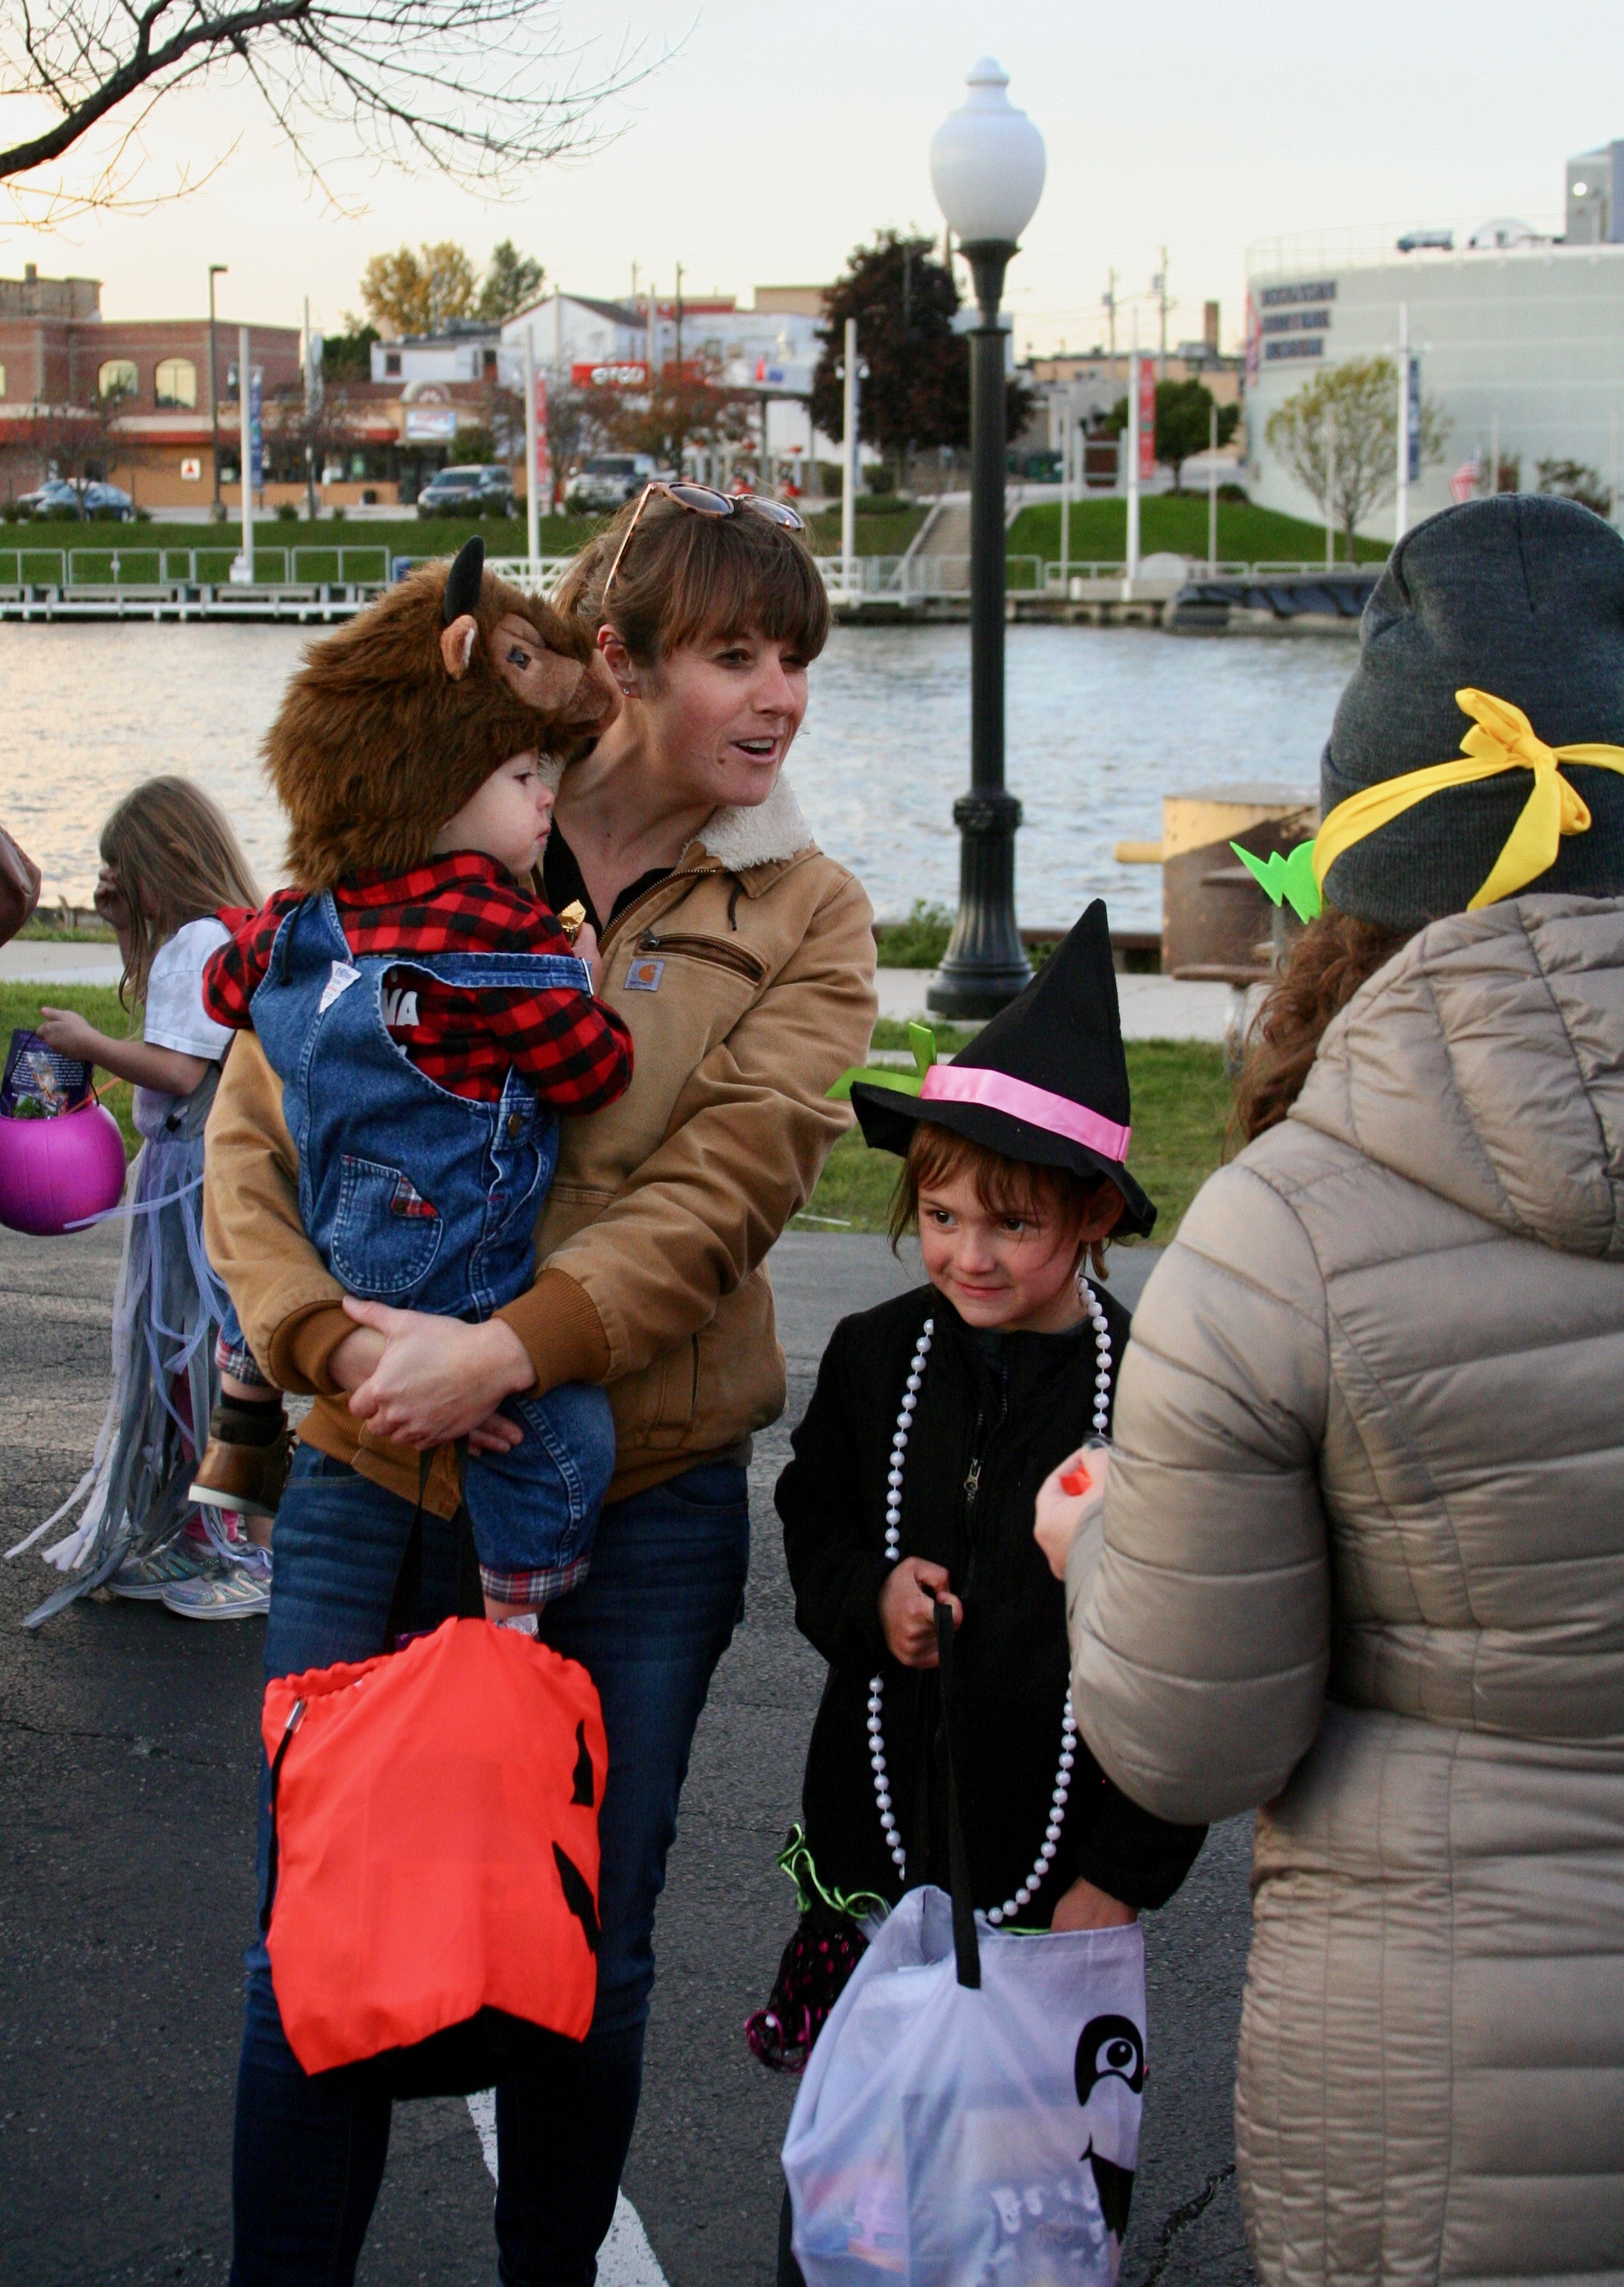 Woman with costumed children speaks with participant handing out treats